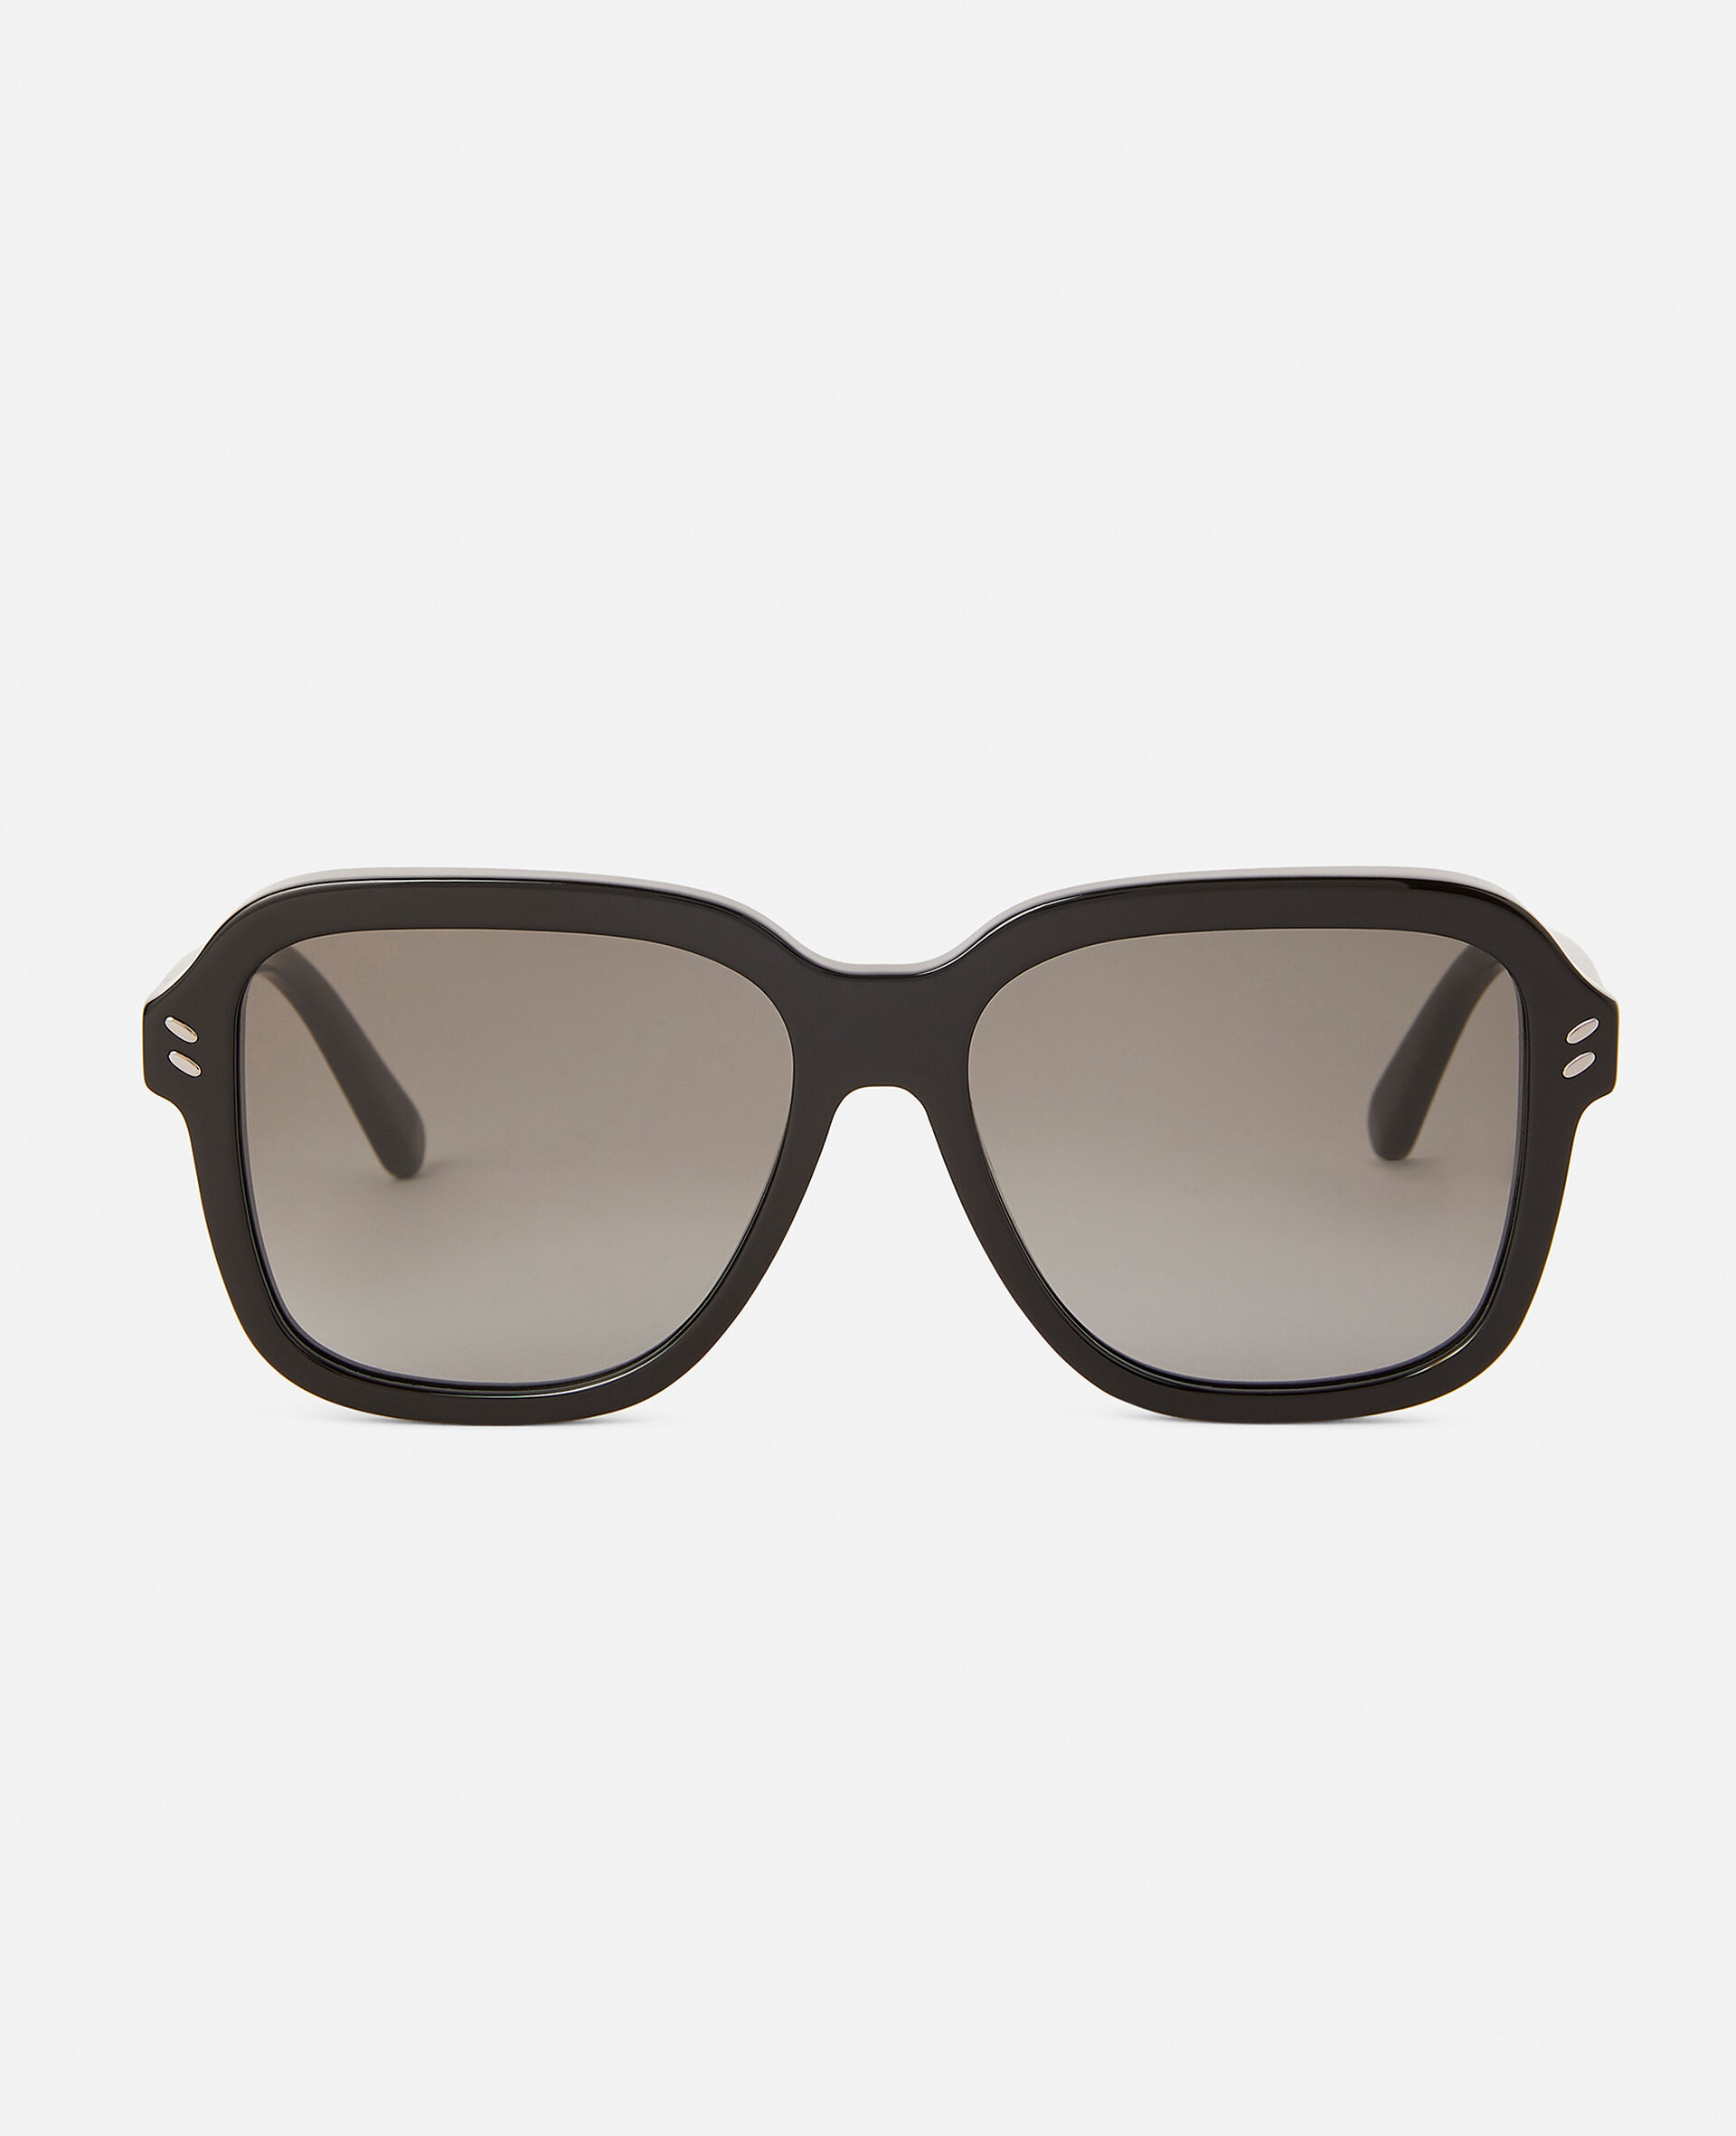 Square Sunglasses-Brown-large image number 5